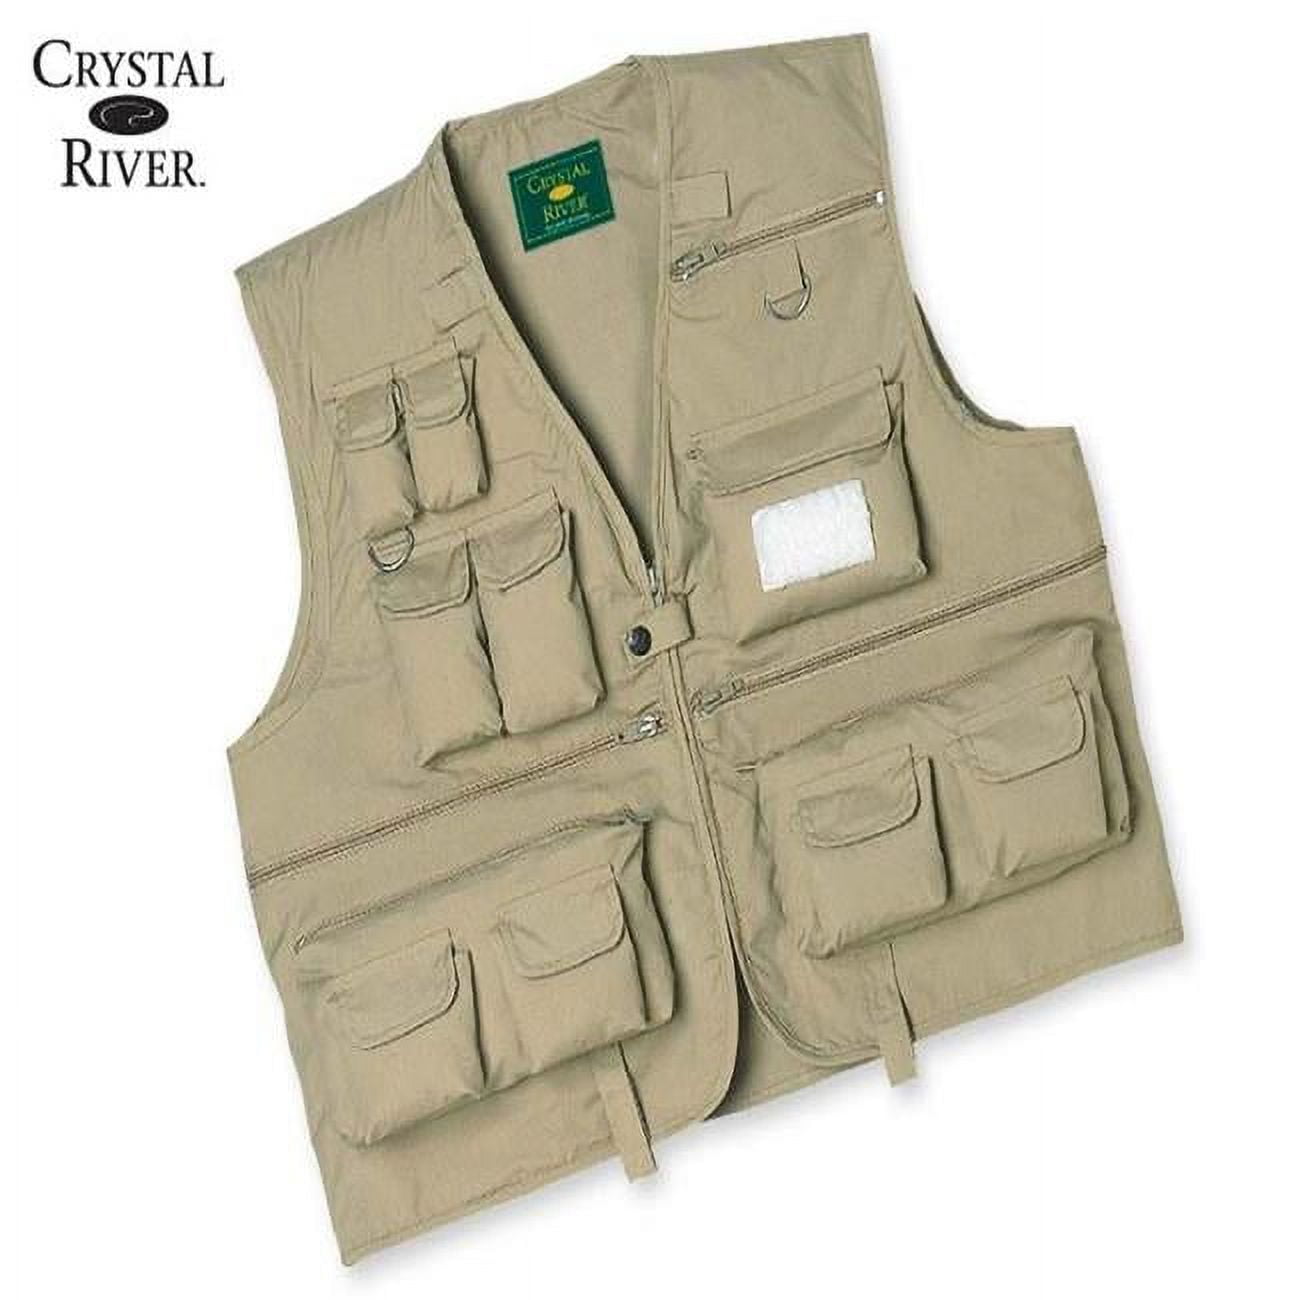 Crystal River Fly Fishing Vest - 2XL